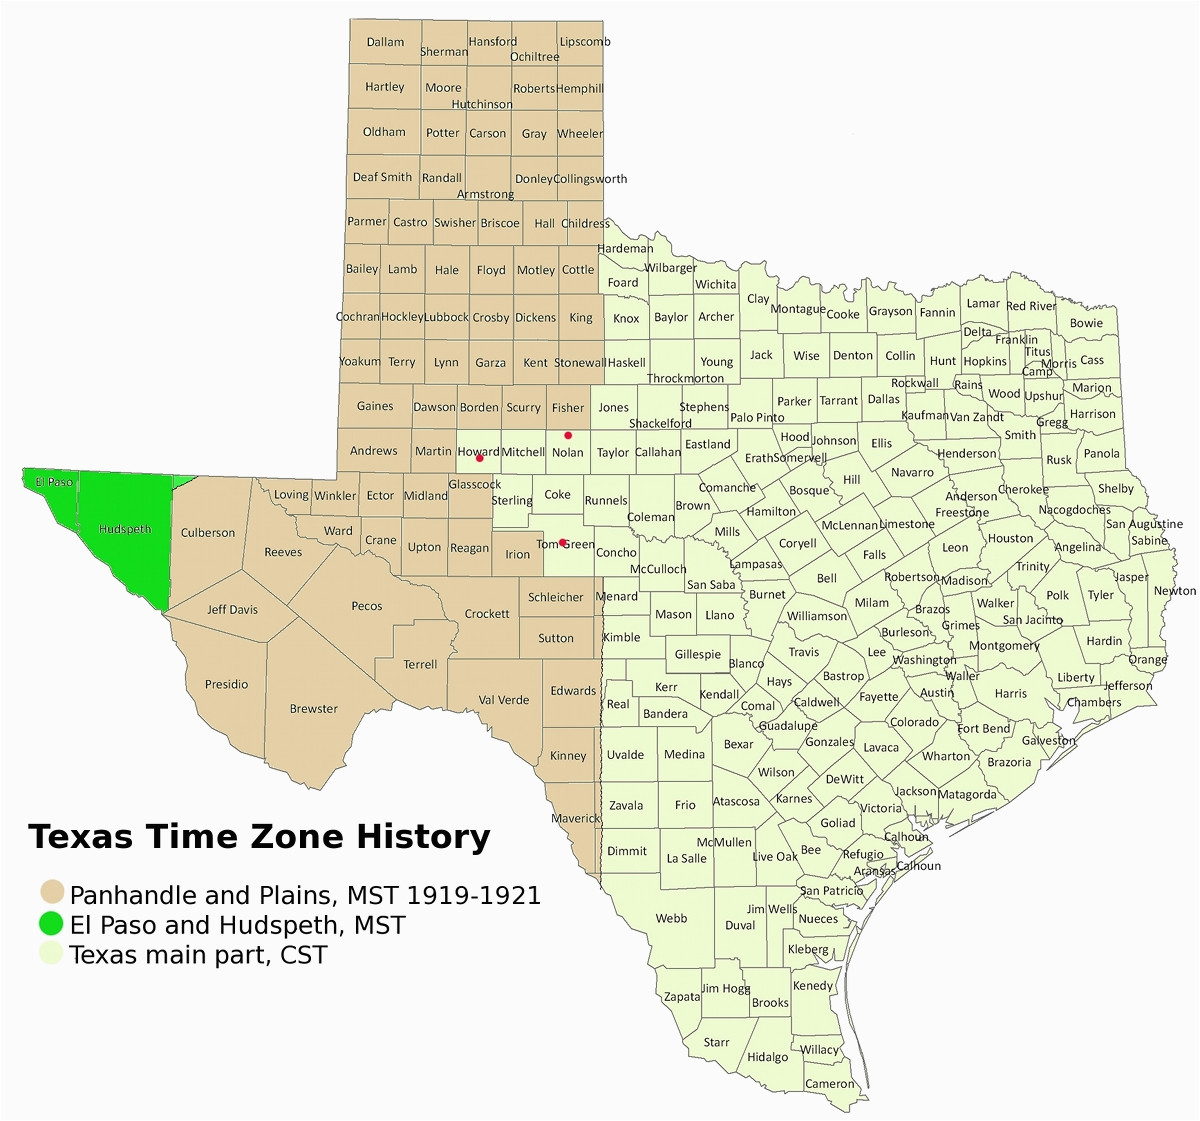 Dilley Texas Map Texas Time Zones Map Business Ideas 2013